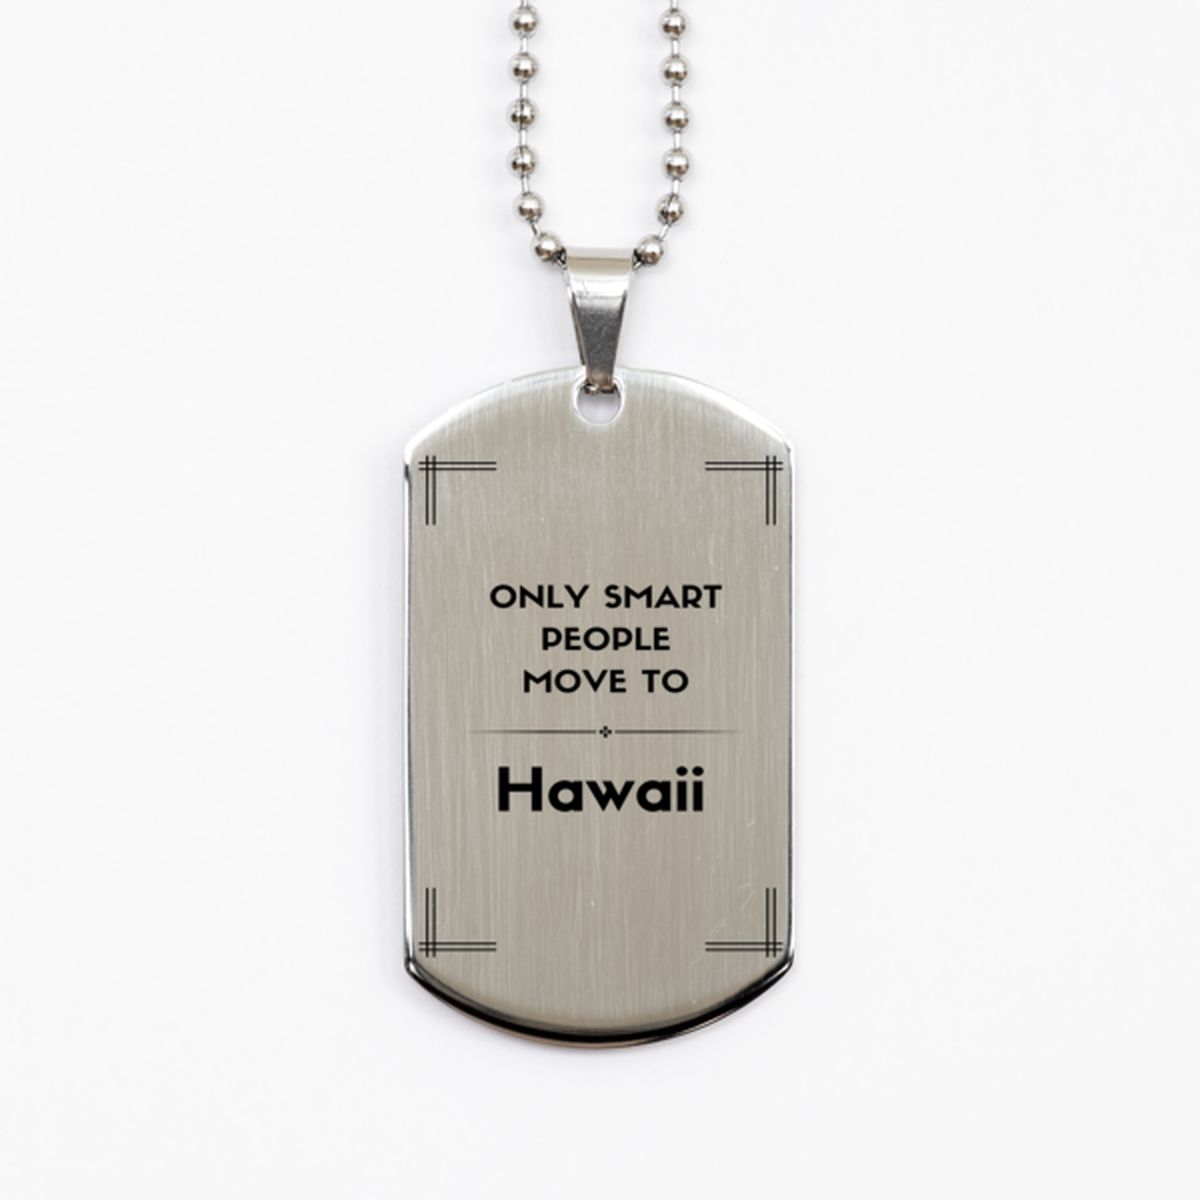 Only smart people move to Hawaii Silver Dog Tag, Gag Gifts For Hawaii, Move to Hawaii Gifts for Friends Coworker Funny Saying Quote